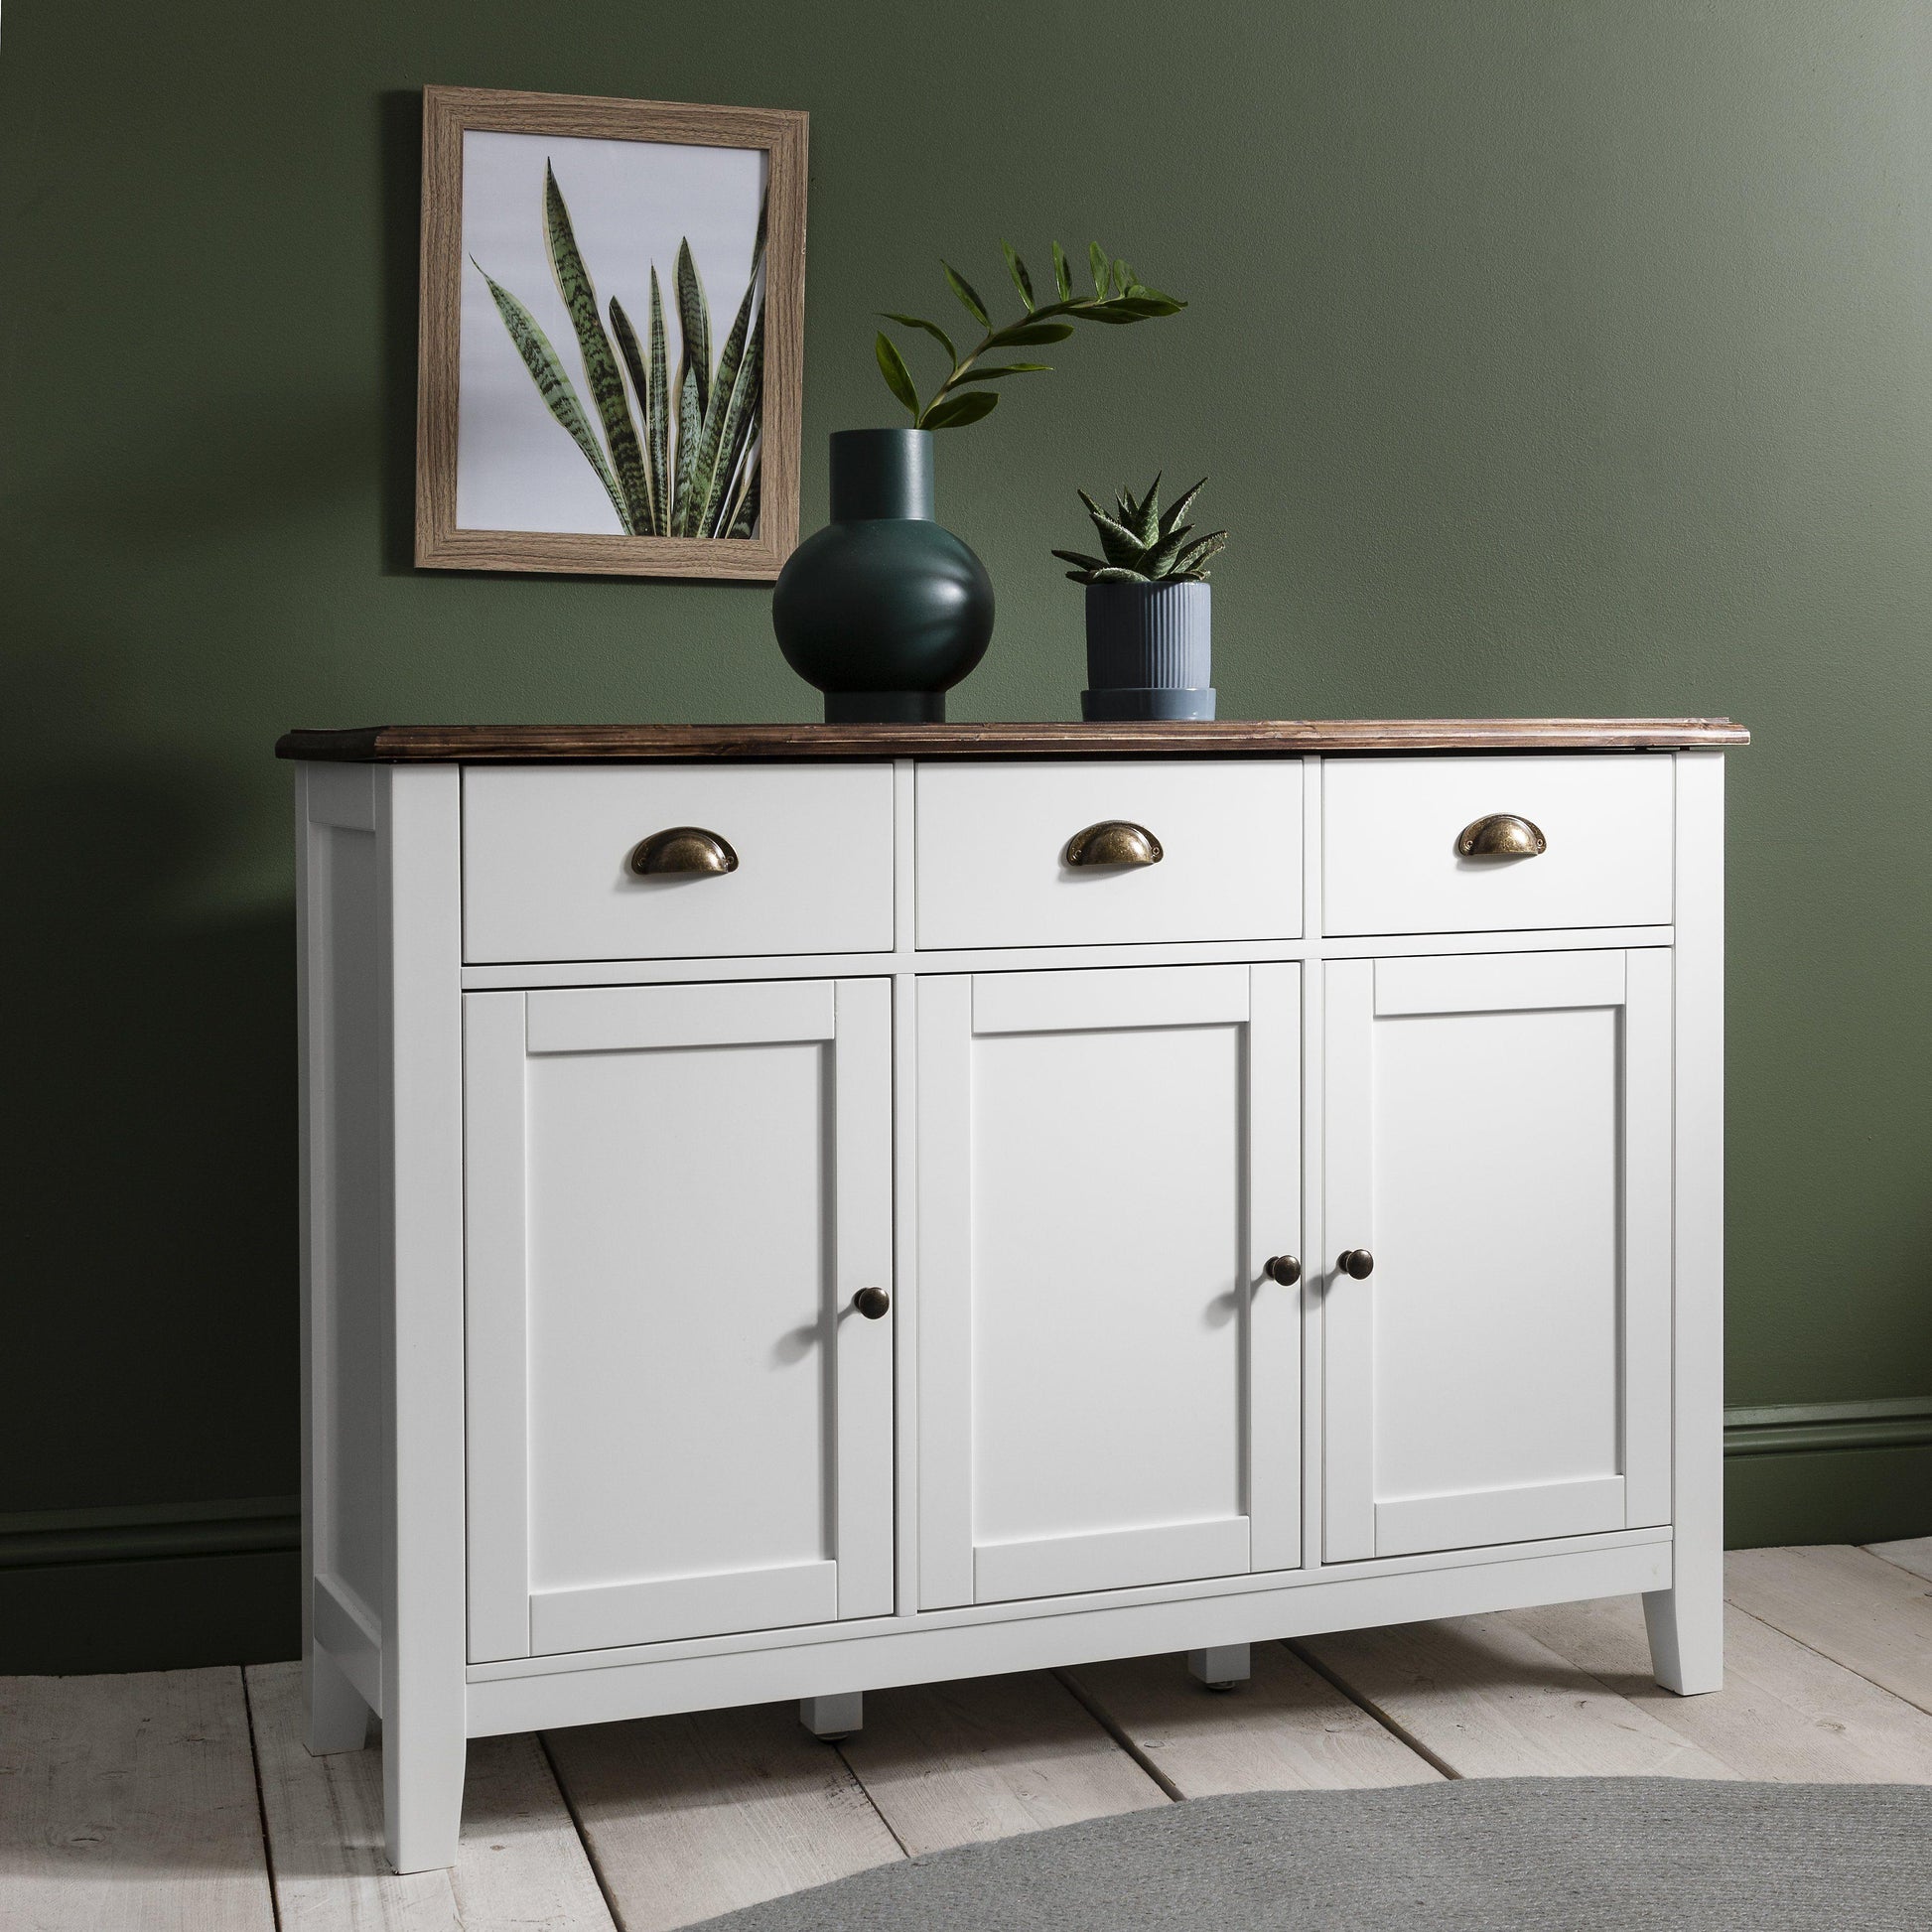 Chatsworth Sideboard in White - Laura James